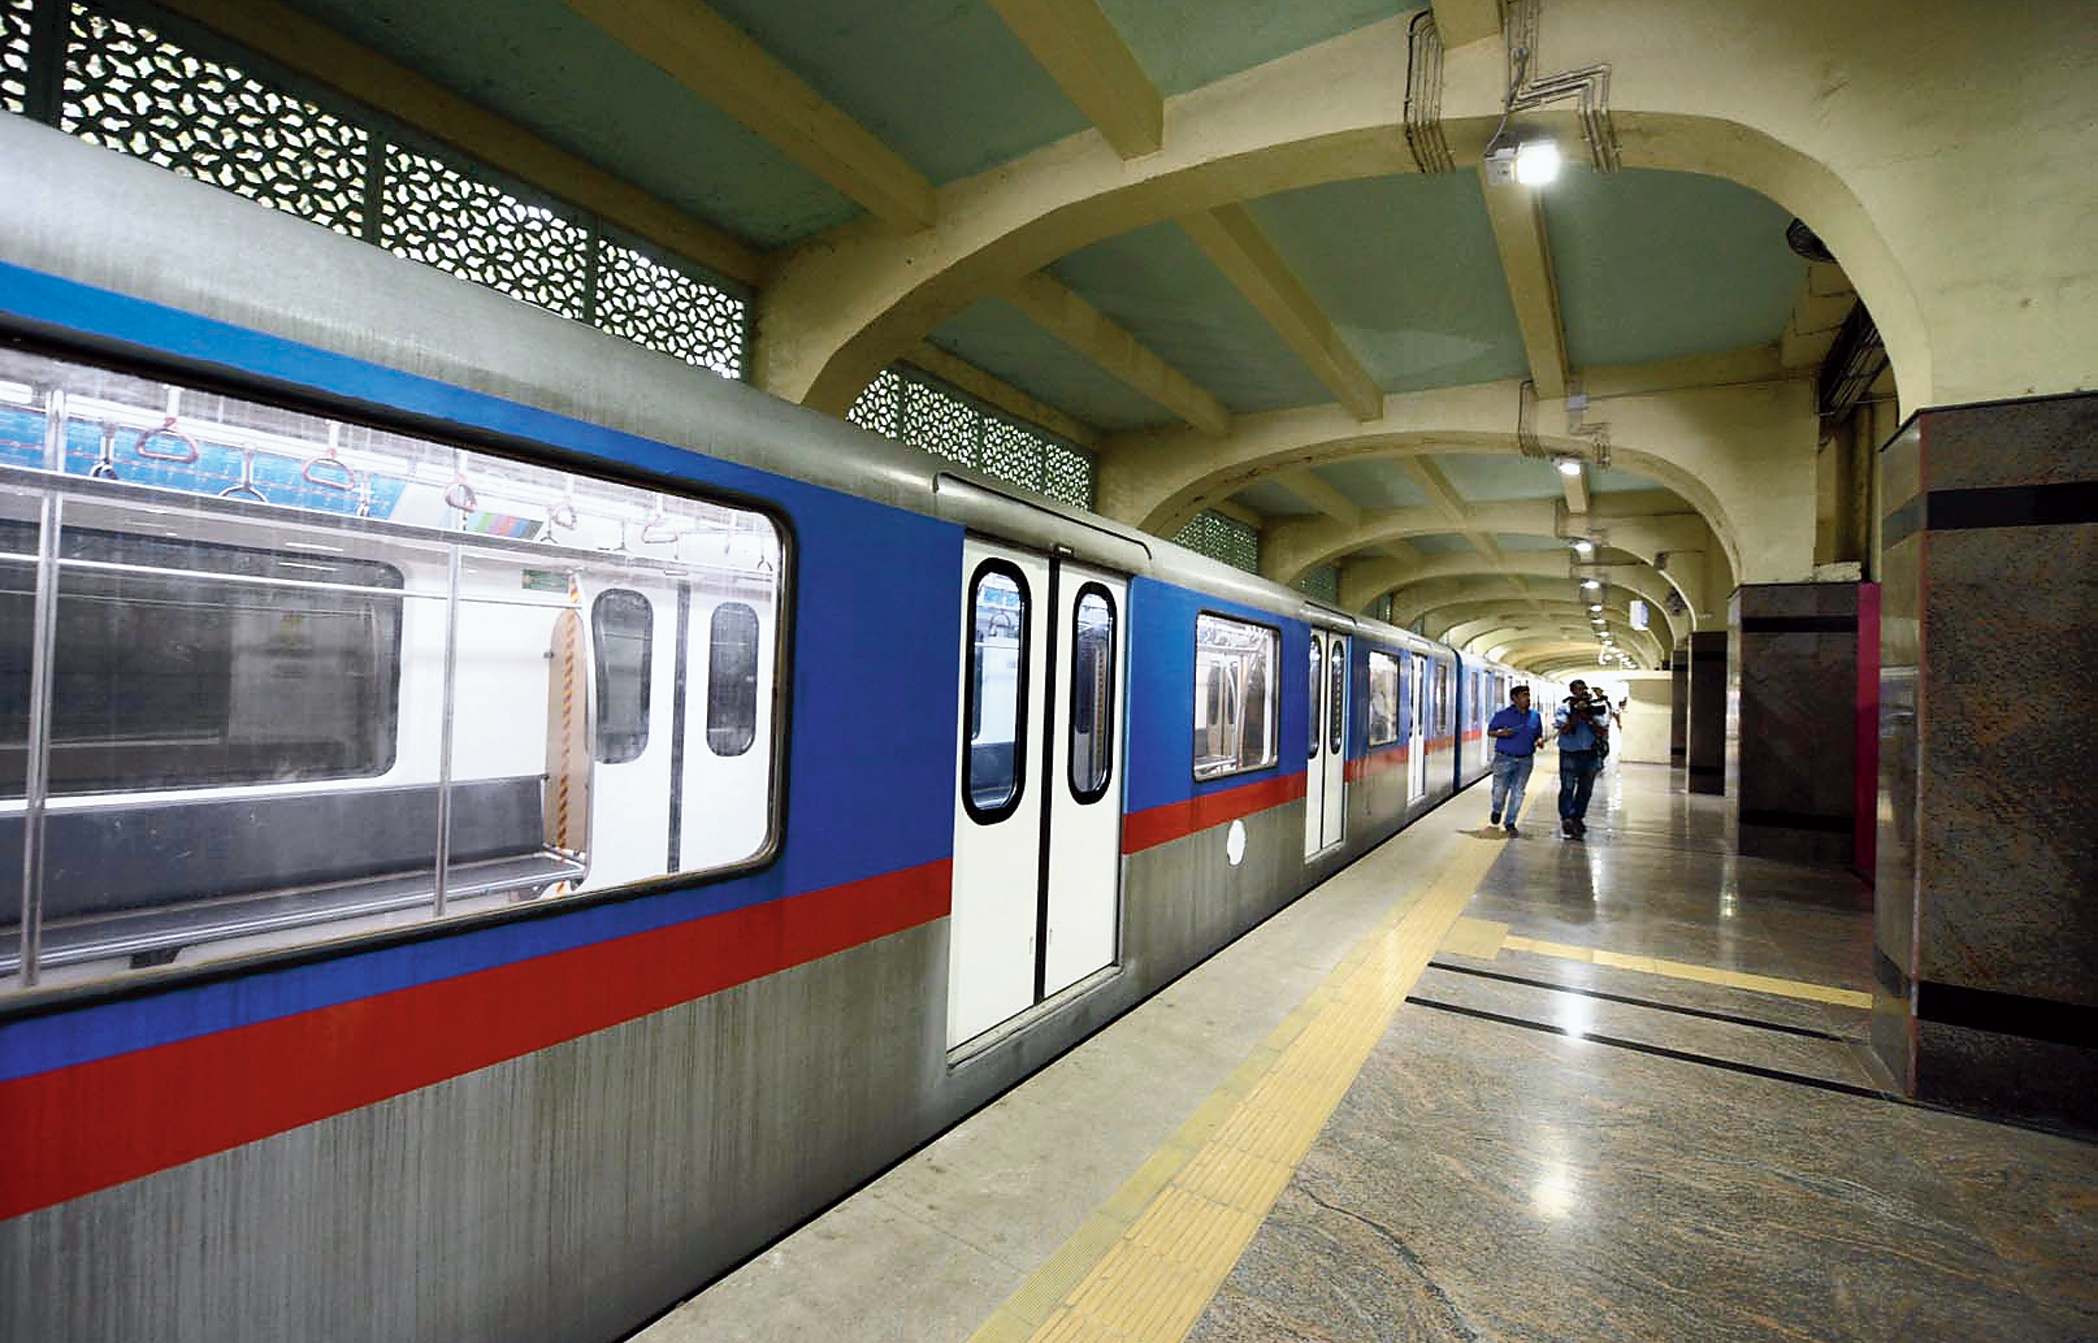 Safety boss for platform mirrors at Calcutta Metro stations - Telegraph  India